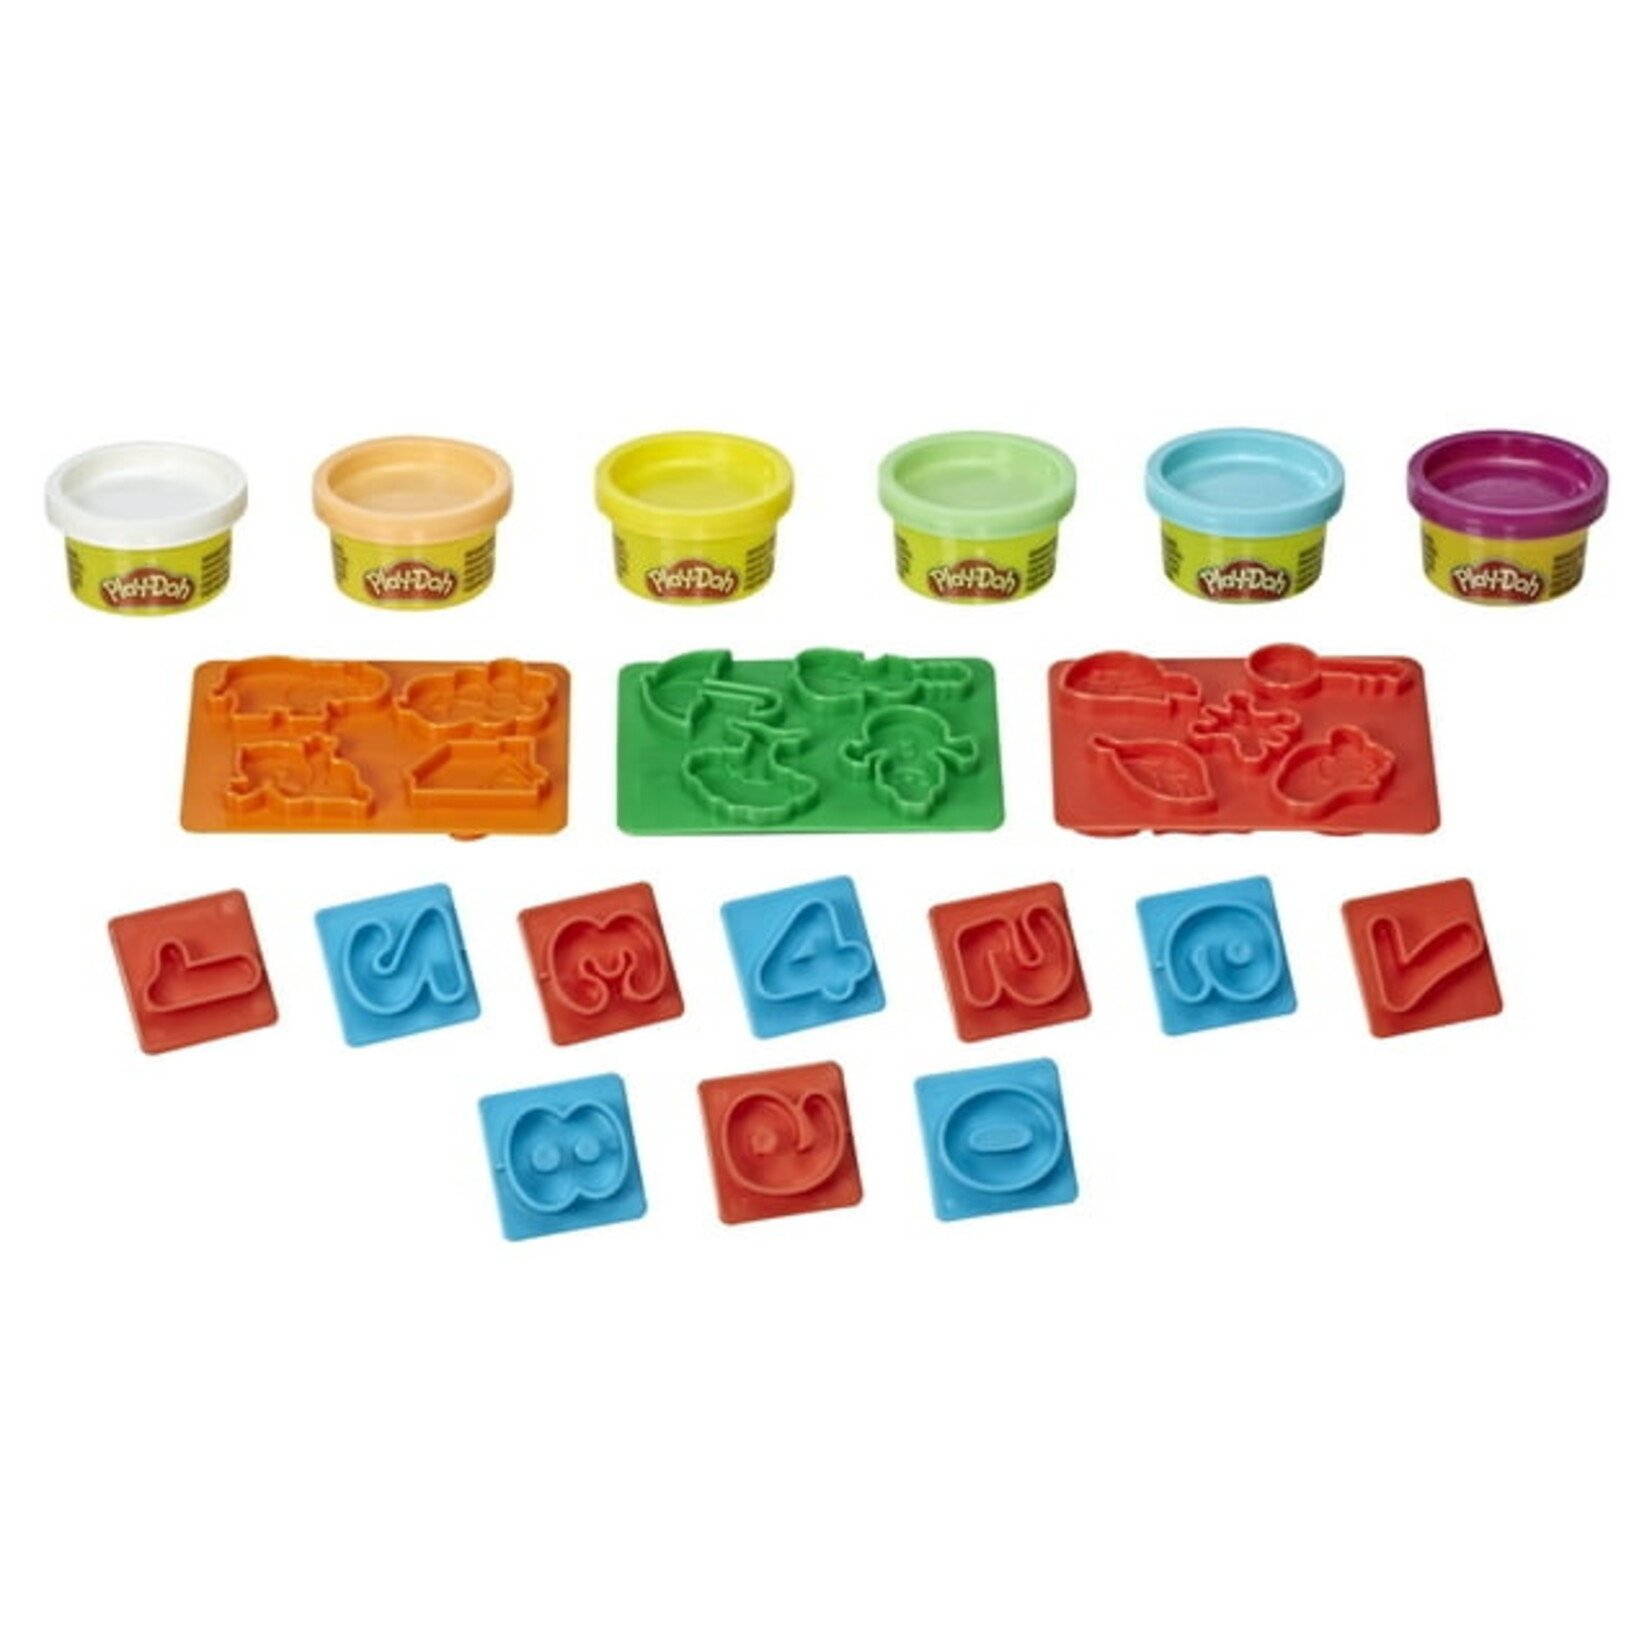 Hasbro Fundamentals Number Stampers Tool Set with 6, 1-Ounce Cans